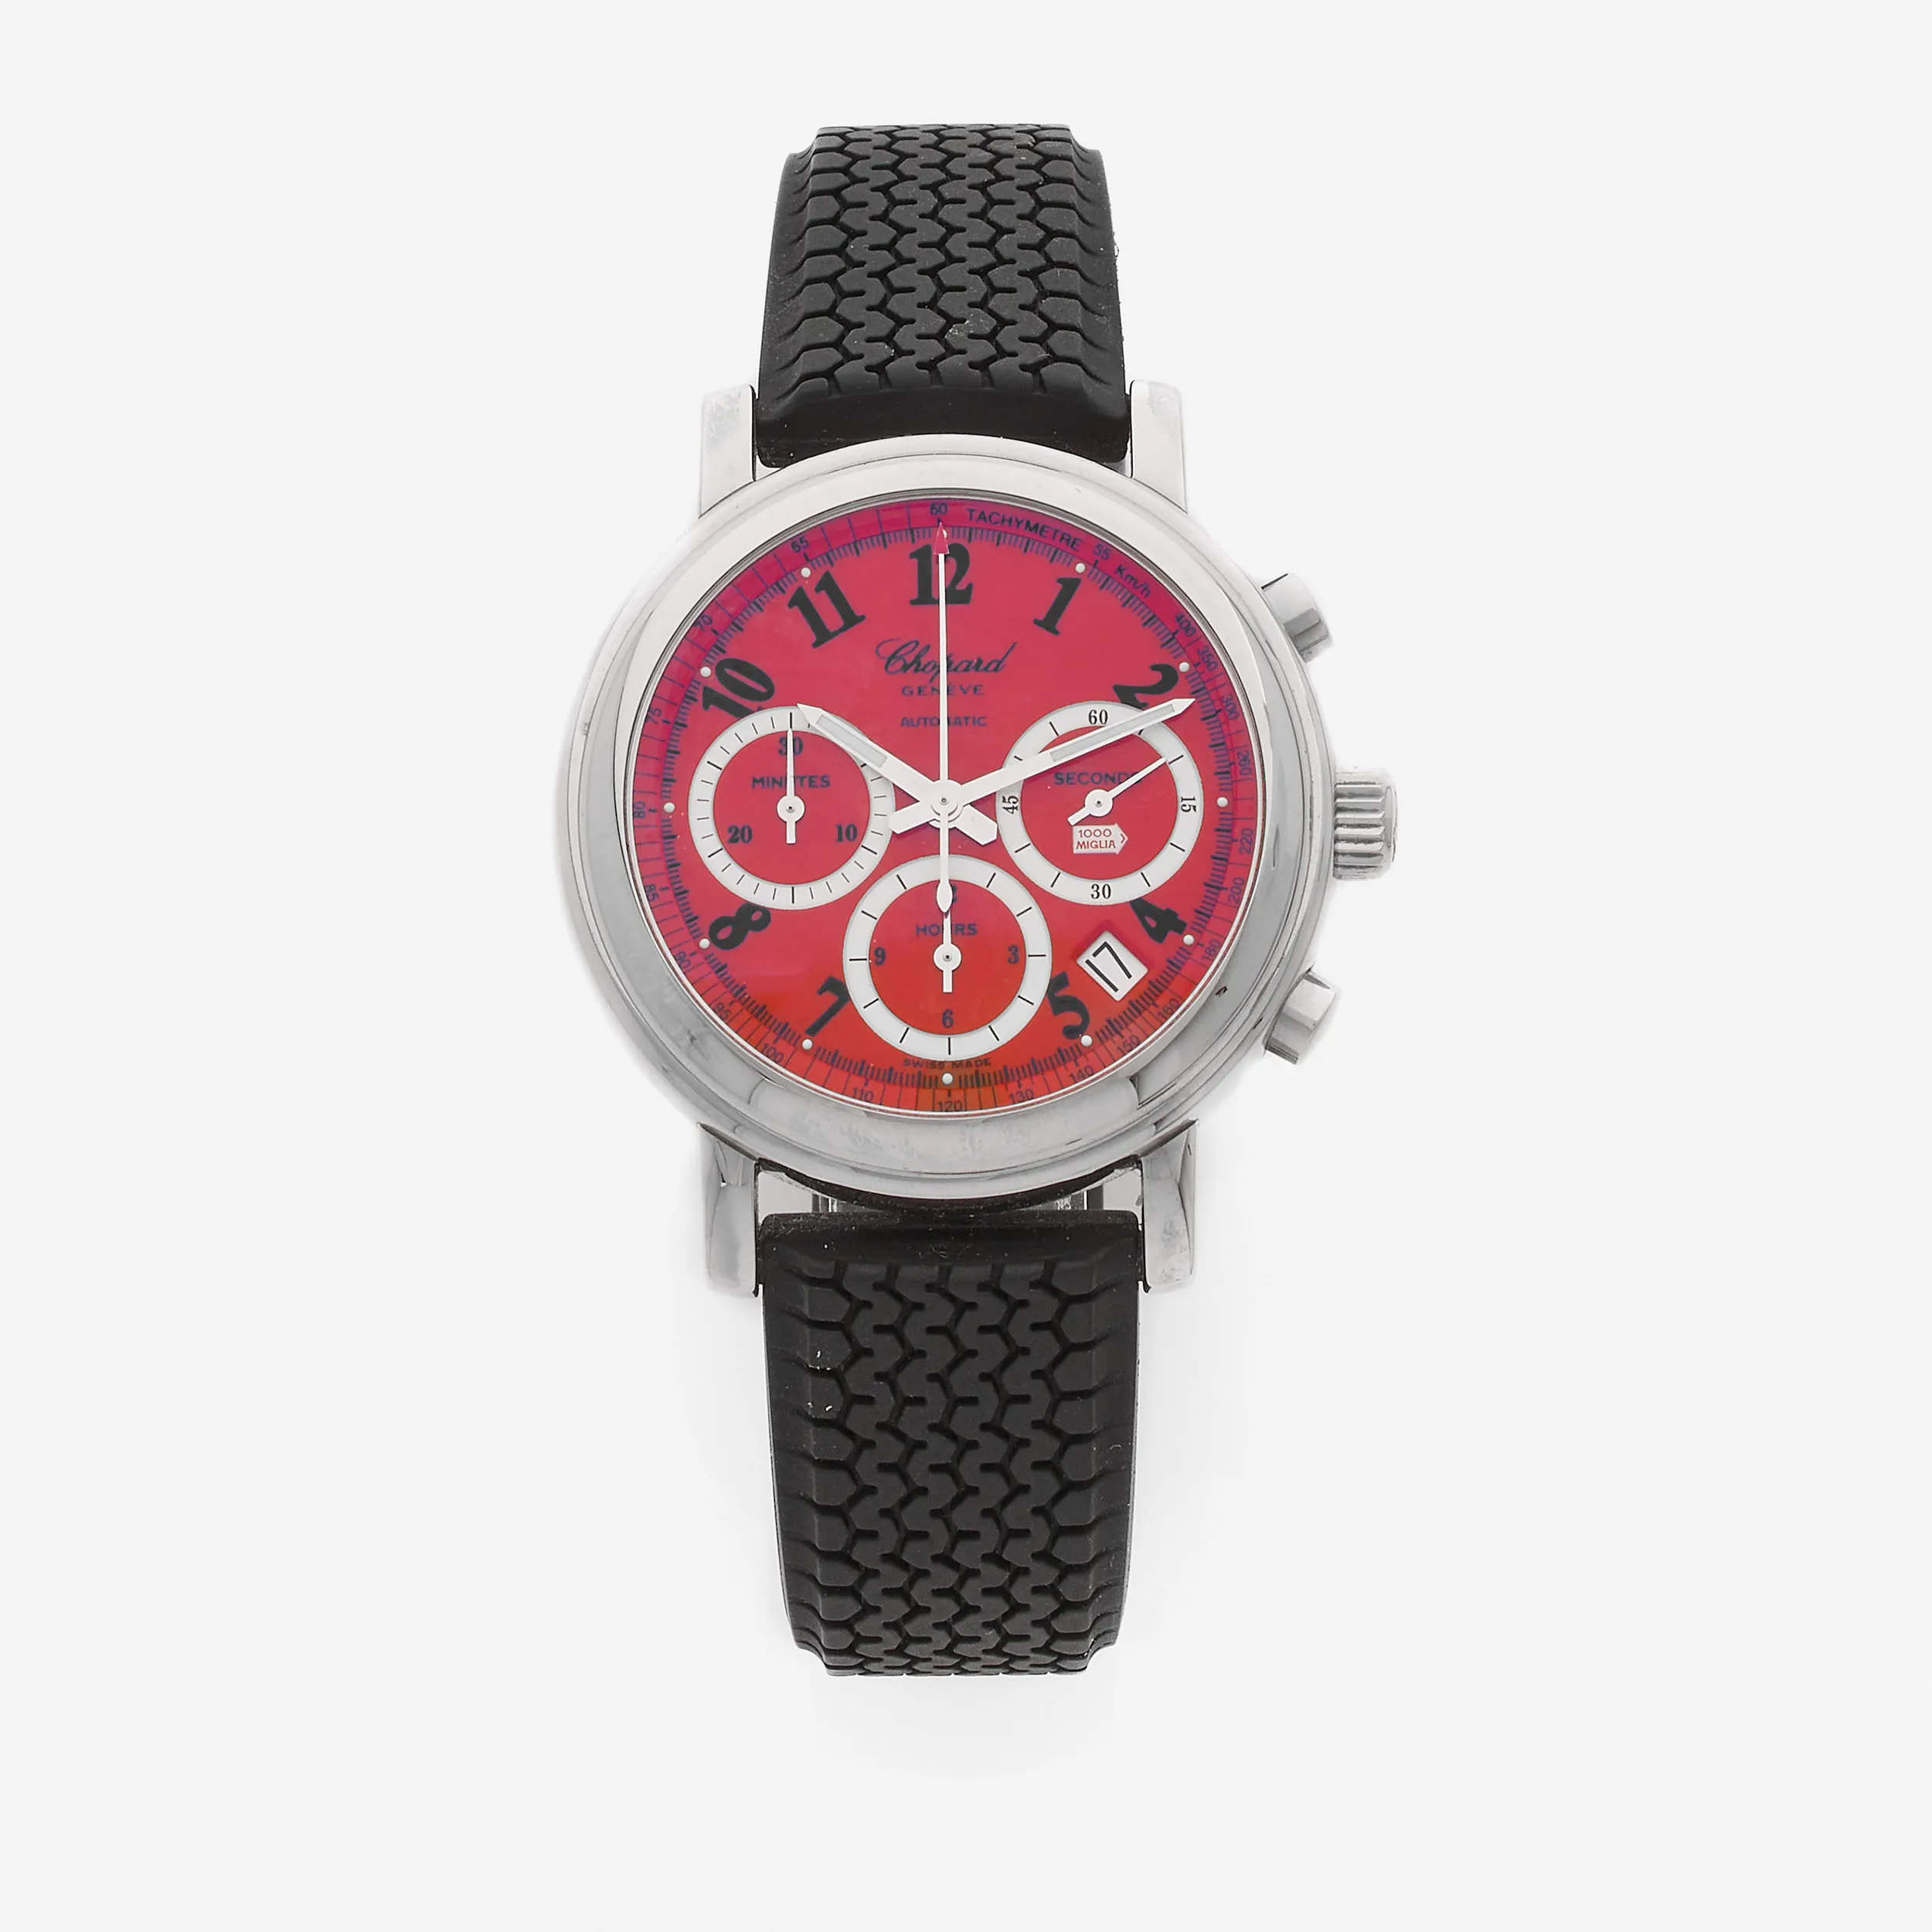 Chopard Mille Miglia 8331 39mm Stainless steel Red